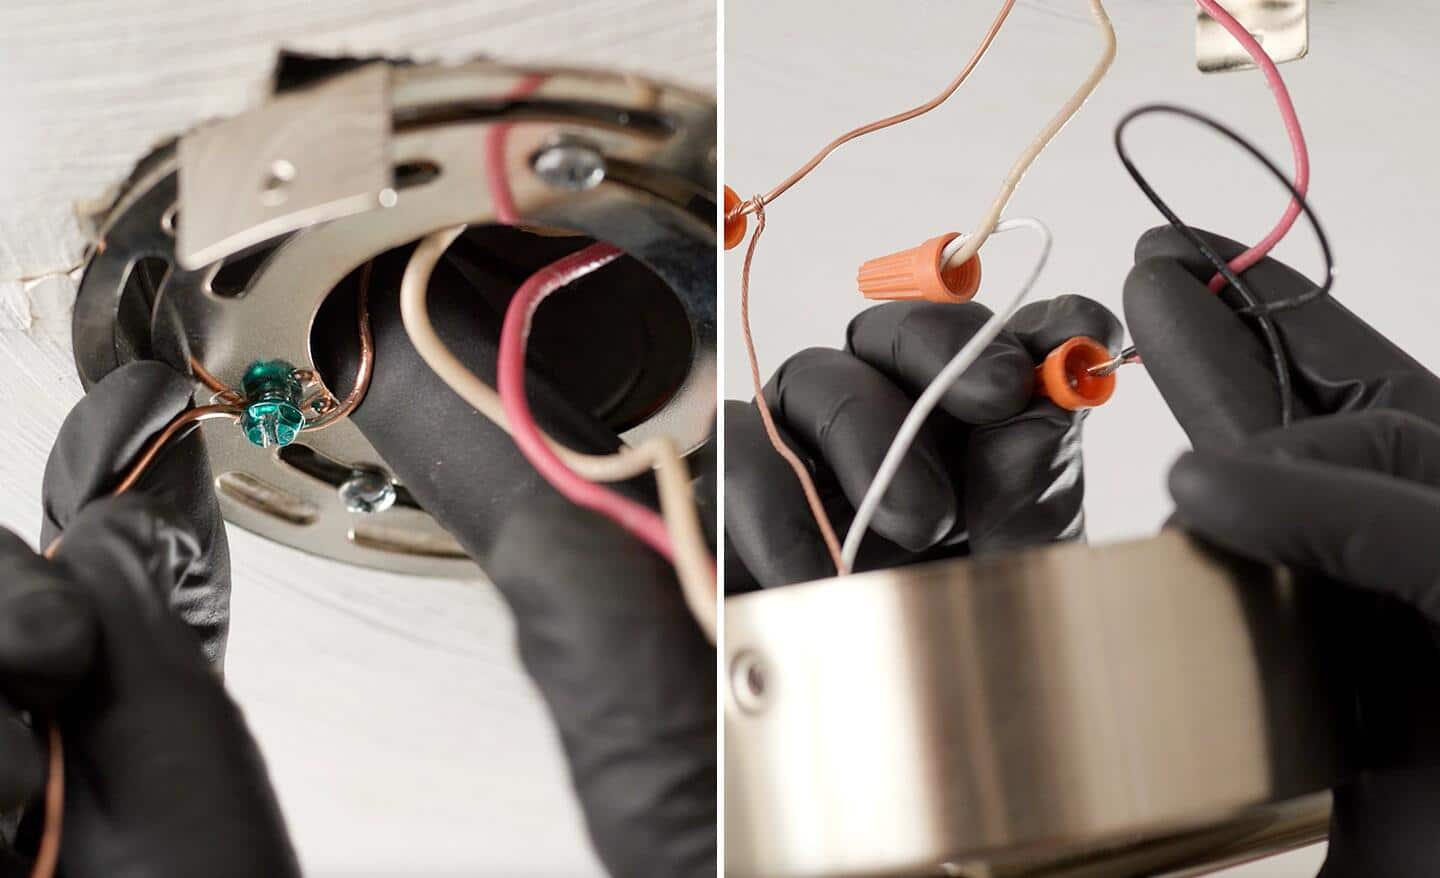 Left image: A person wraps the ground wire around the loosened green screw on the mounting plate. Right image: A person screws a wire nut onto the twisted together, stripped ends of the two load-carrying wires.